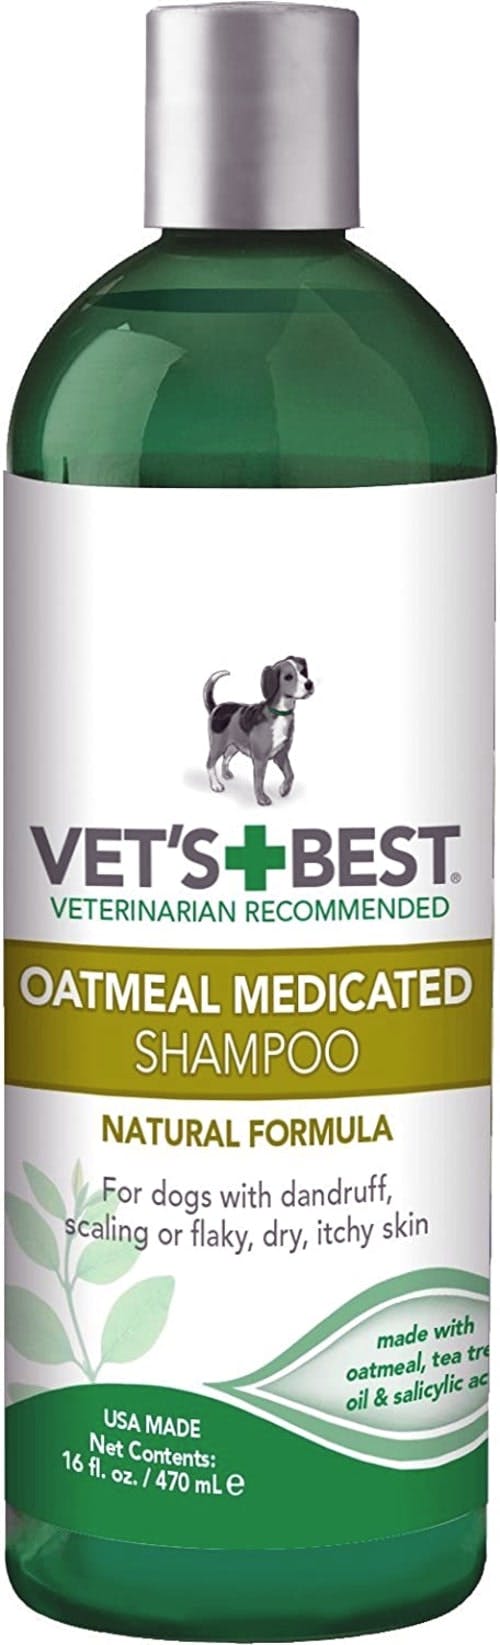 Vet's Best Medicated Oatmeal Dog Shampoo review